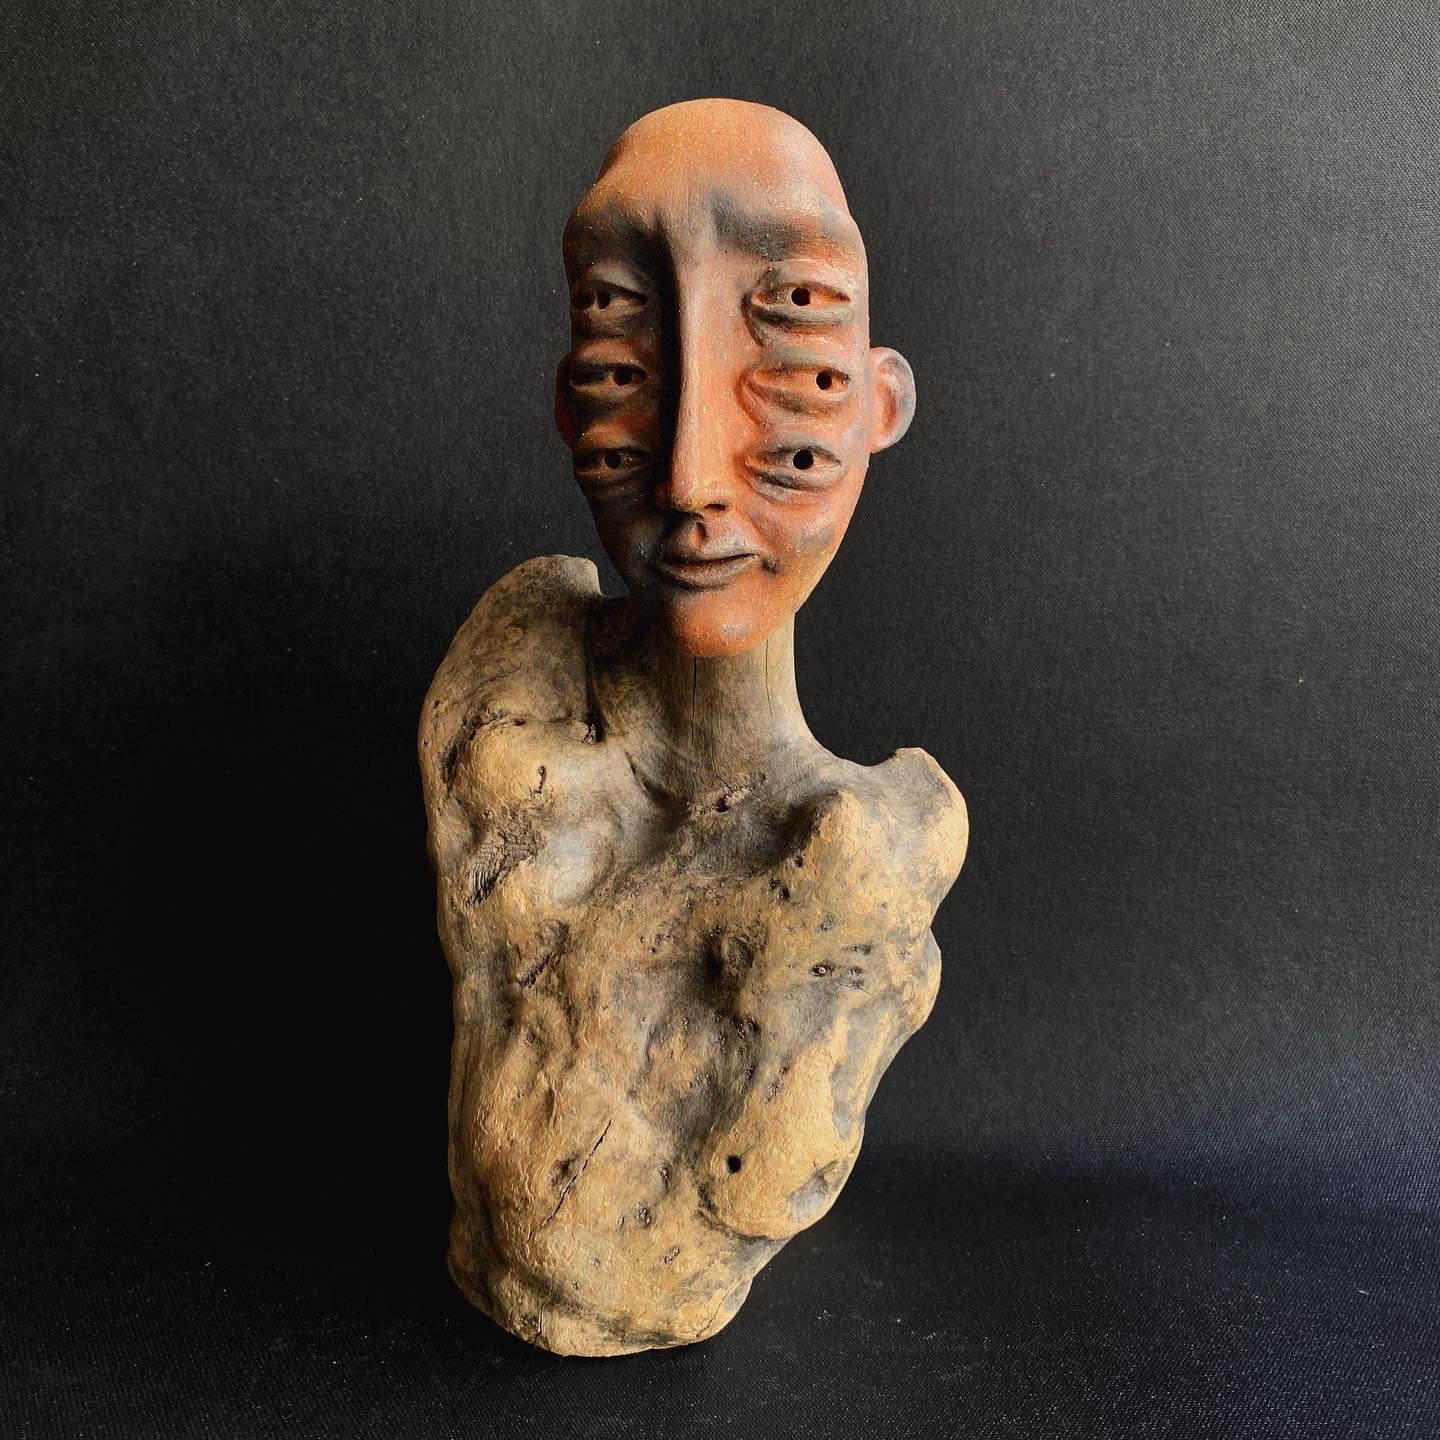  'Six-Eyed Creature' features six intelligent eyes, each a chronicle of the past, present and future as an observer and archivist. The journey of the piece began as the driftwood was collected and processed by Mustafa Sahin from the shores of his hom